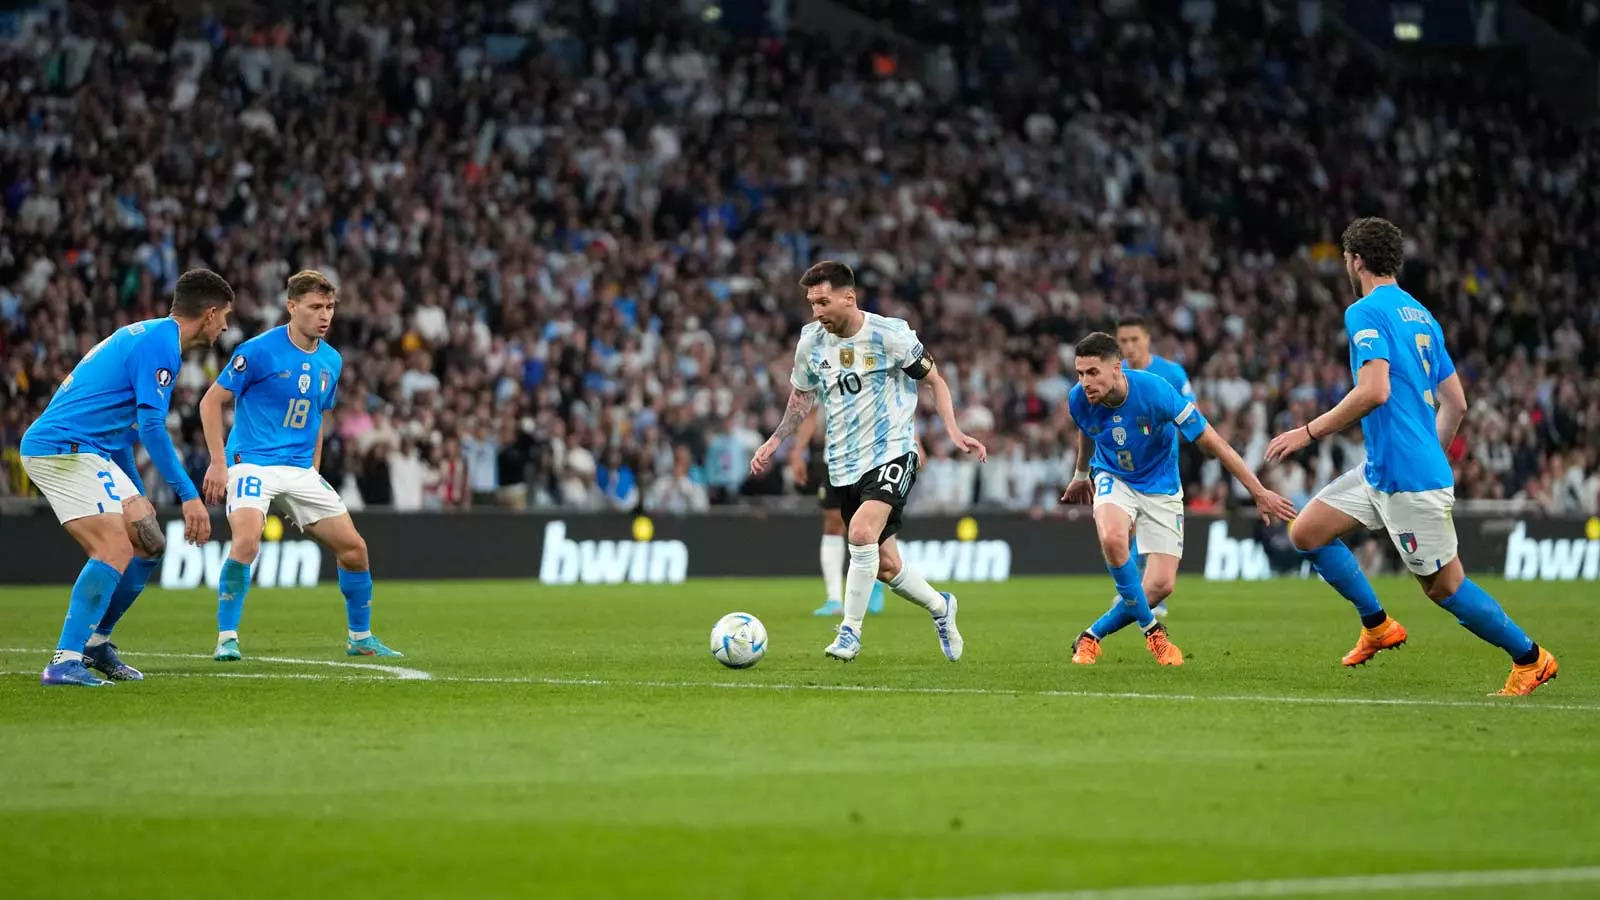 Too hot for Italy to handle Lionel Messi becomes a beast to help Argentina lift Finalissima